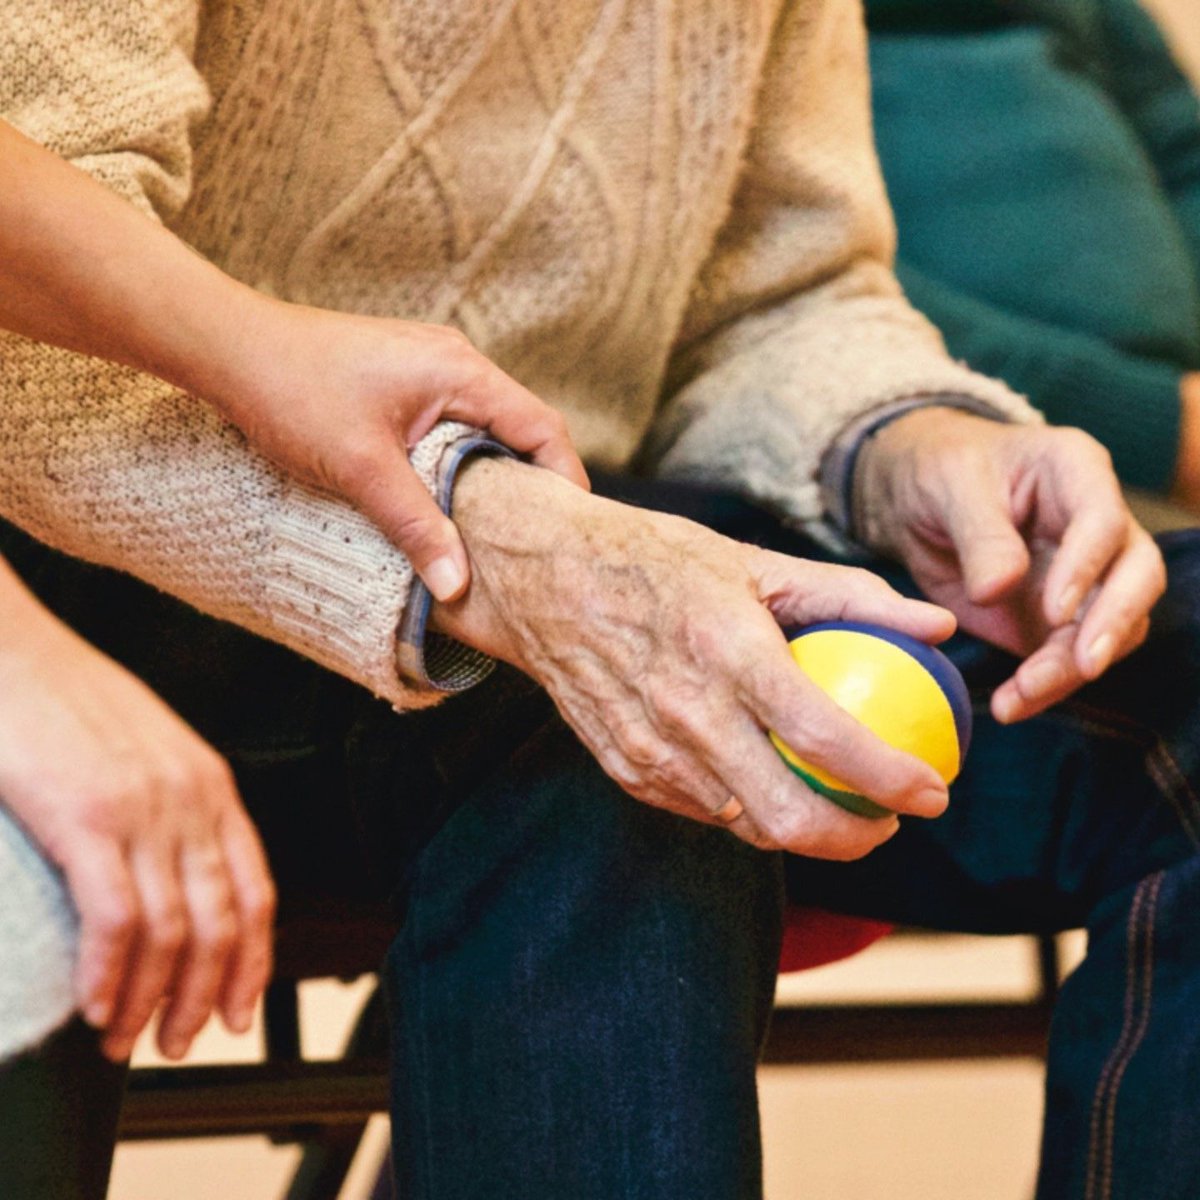 Pop along to our next Carers' Forum on 30 April at 9.30am. It's an opportunity to speak to other carers and find out about and influence the services we provide to support carers in Hillingdon. Find out more 👉 buff.ly/3UjkZyU